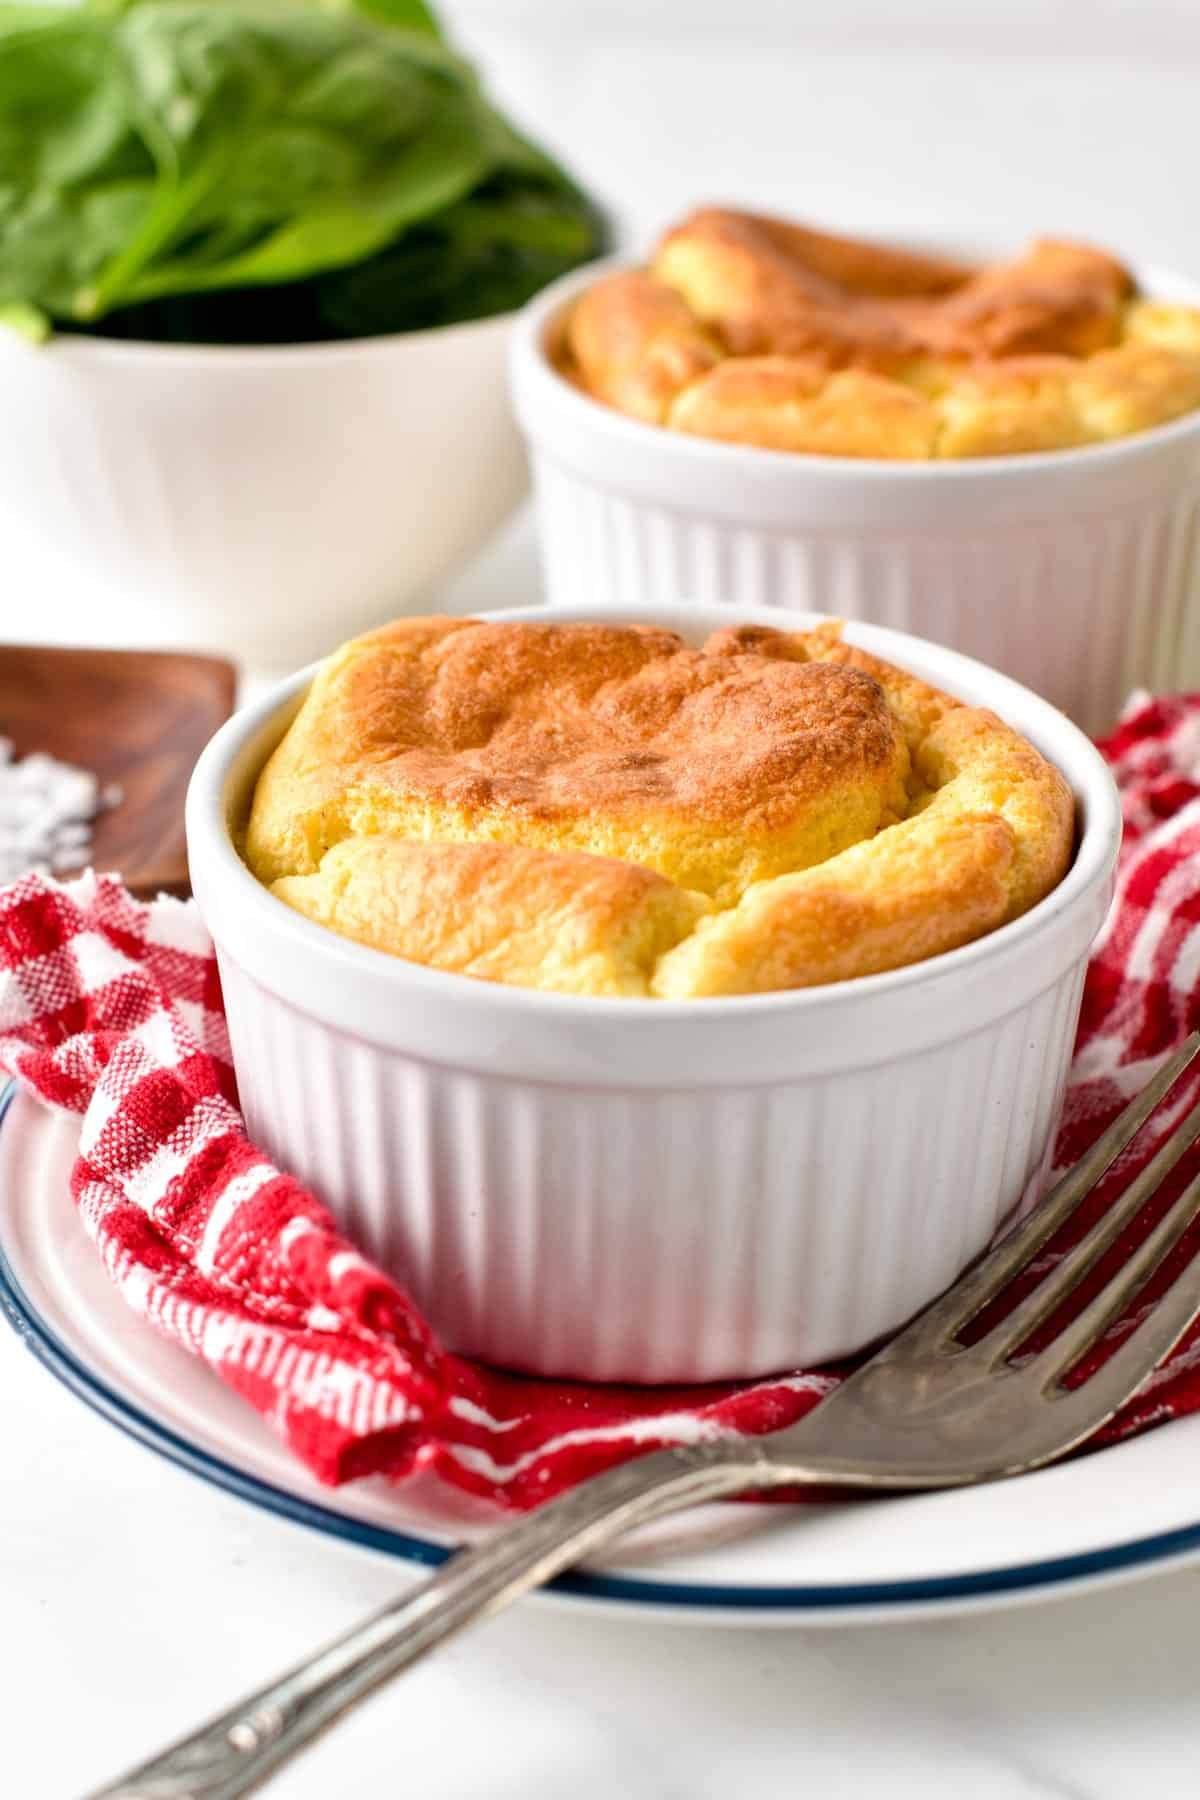 These Egg Souffles are fluffy eggs baked in single-serve ramekins with a fancy look perfect as a brunch recipe. Plus these egg souffles are ready in less than 30 minutes and are a great way to feed a breakfast crowd on the weekend with a fancy egg breakfast recipe.